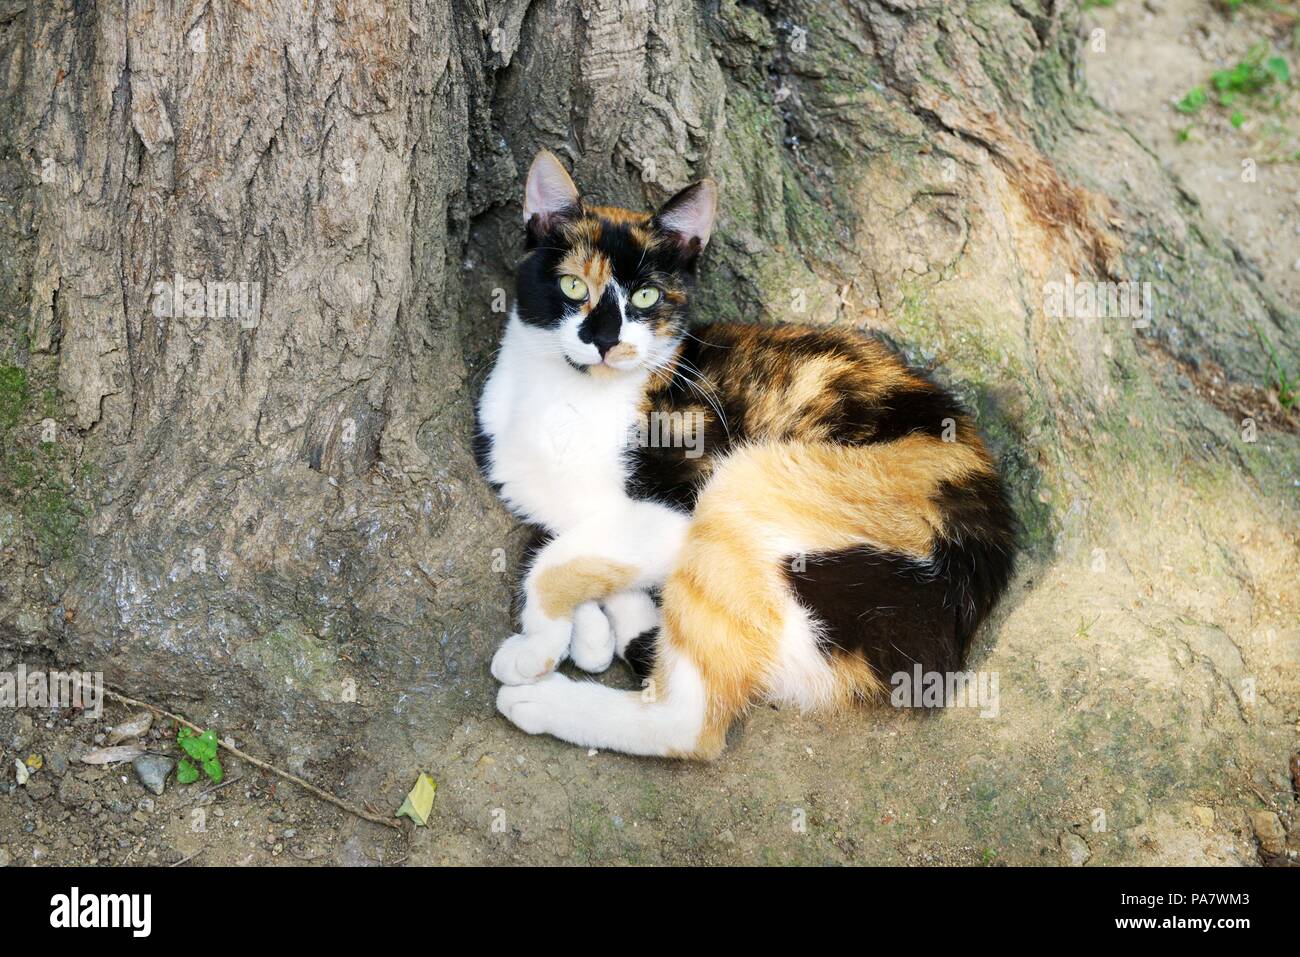 Homeless old cat Stock Photo